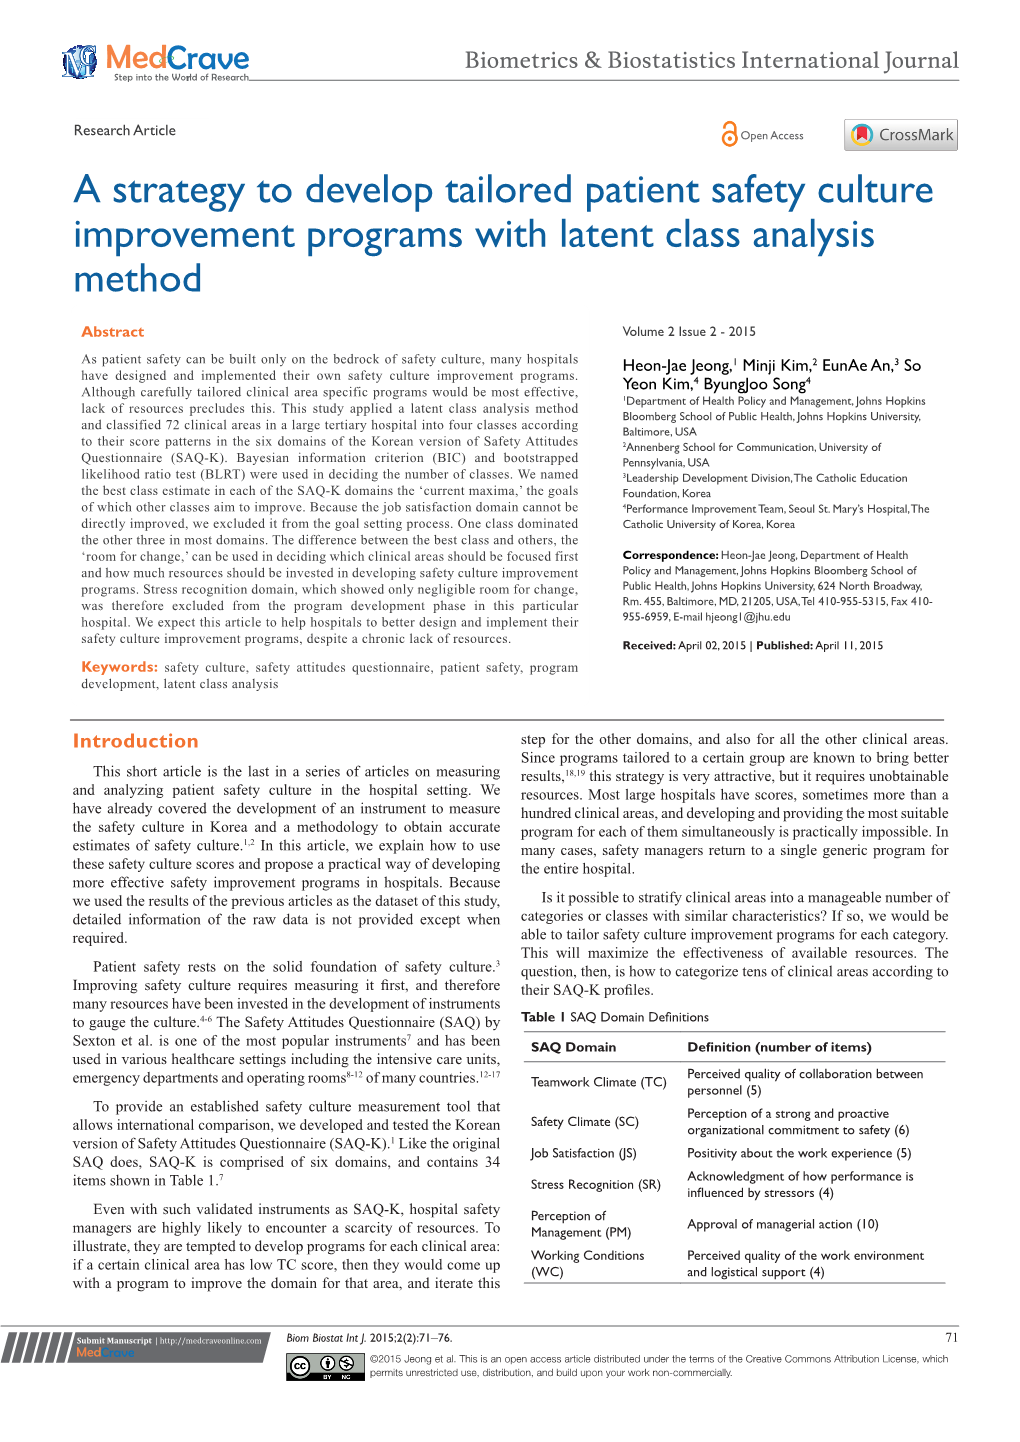 Jeong HJ, Kim M, an EA, Et Al. a Strategy to Develop Tailored Patient Safety Culture Improvement Programs with Latent Class Analysis Method